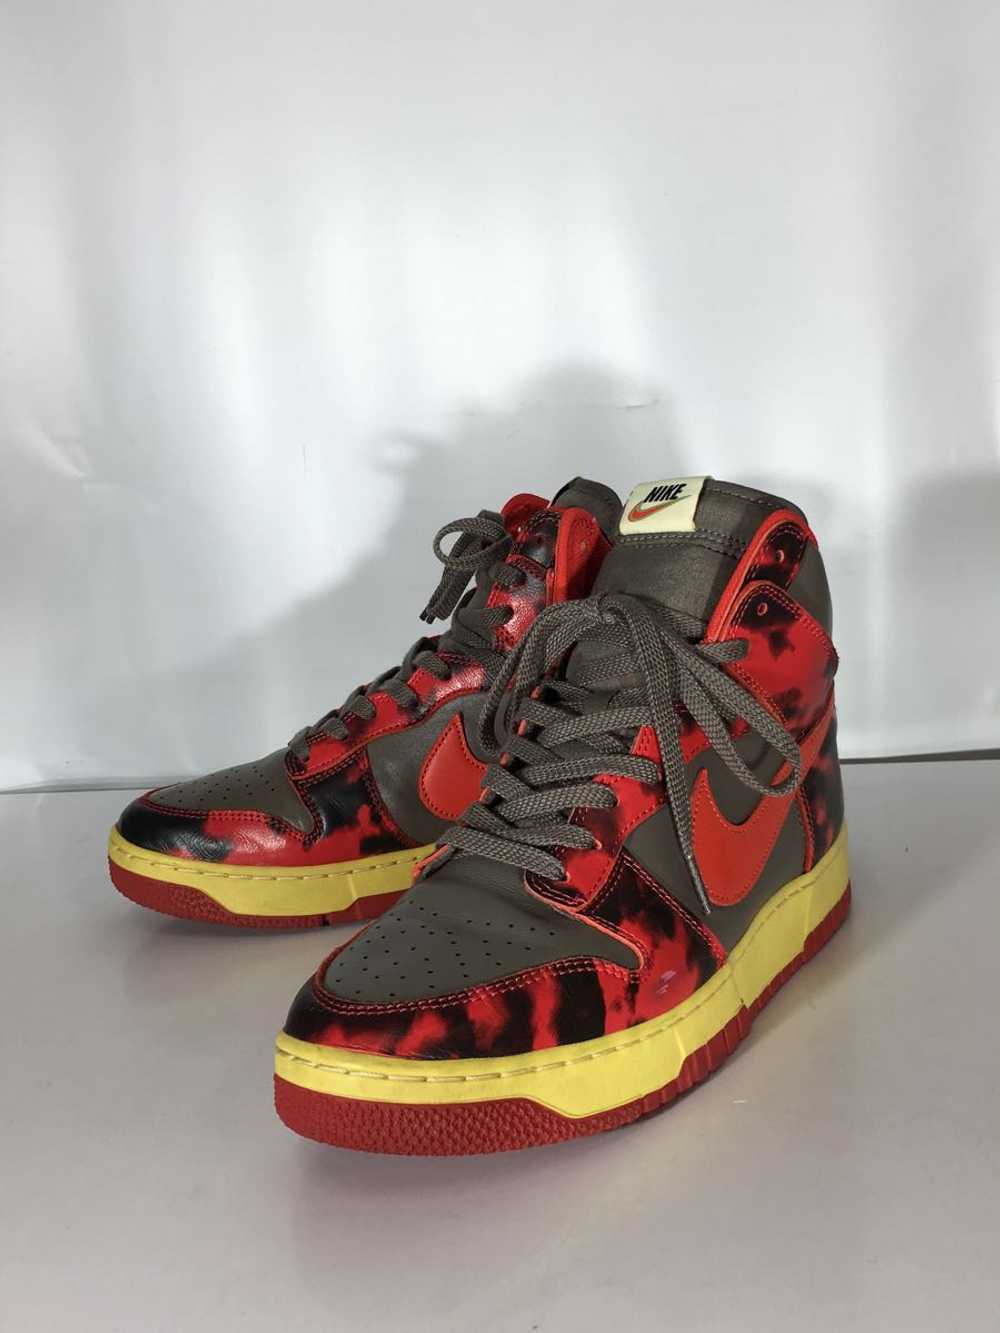 Nike Dunk High 1985 Sp Sp/Red Shoes US11 J6P96 - image 2